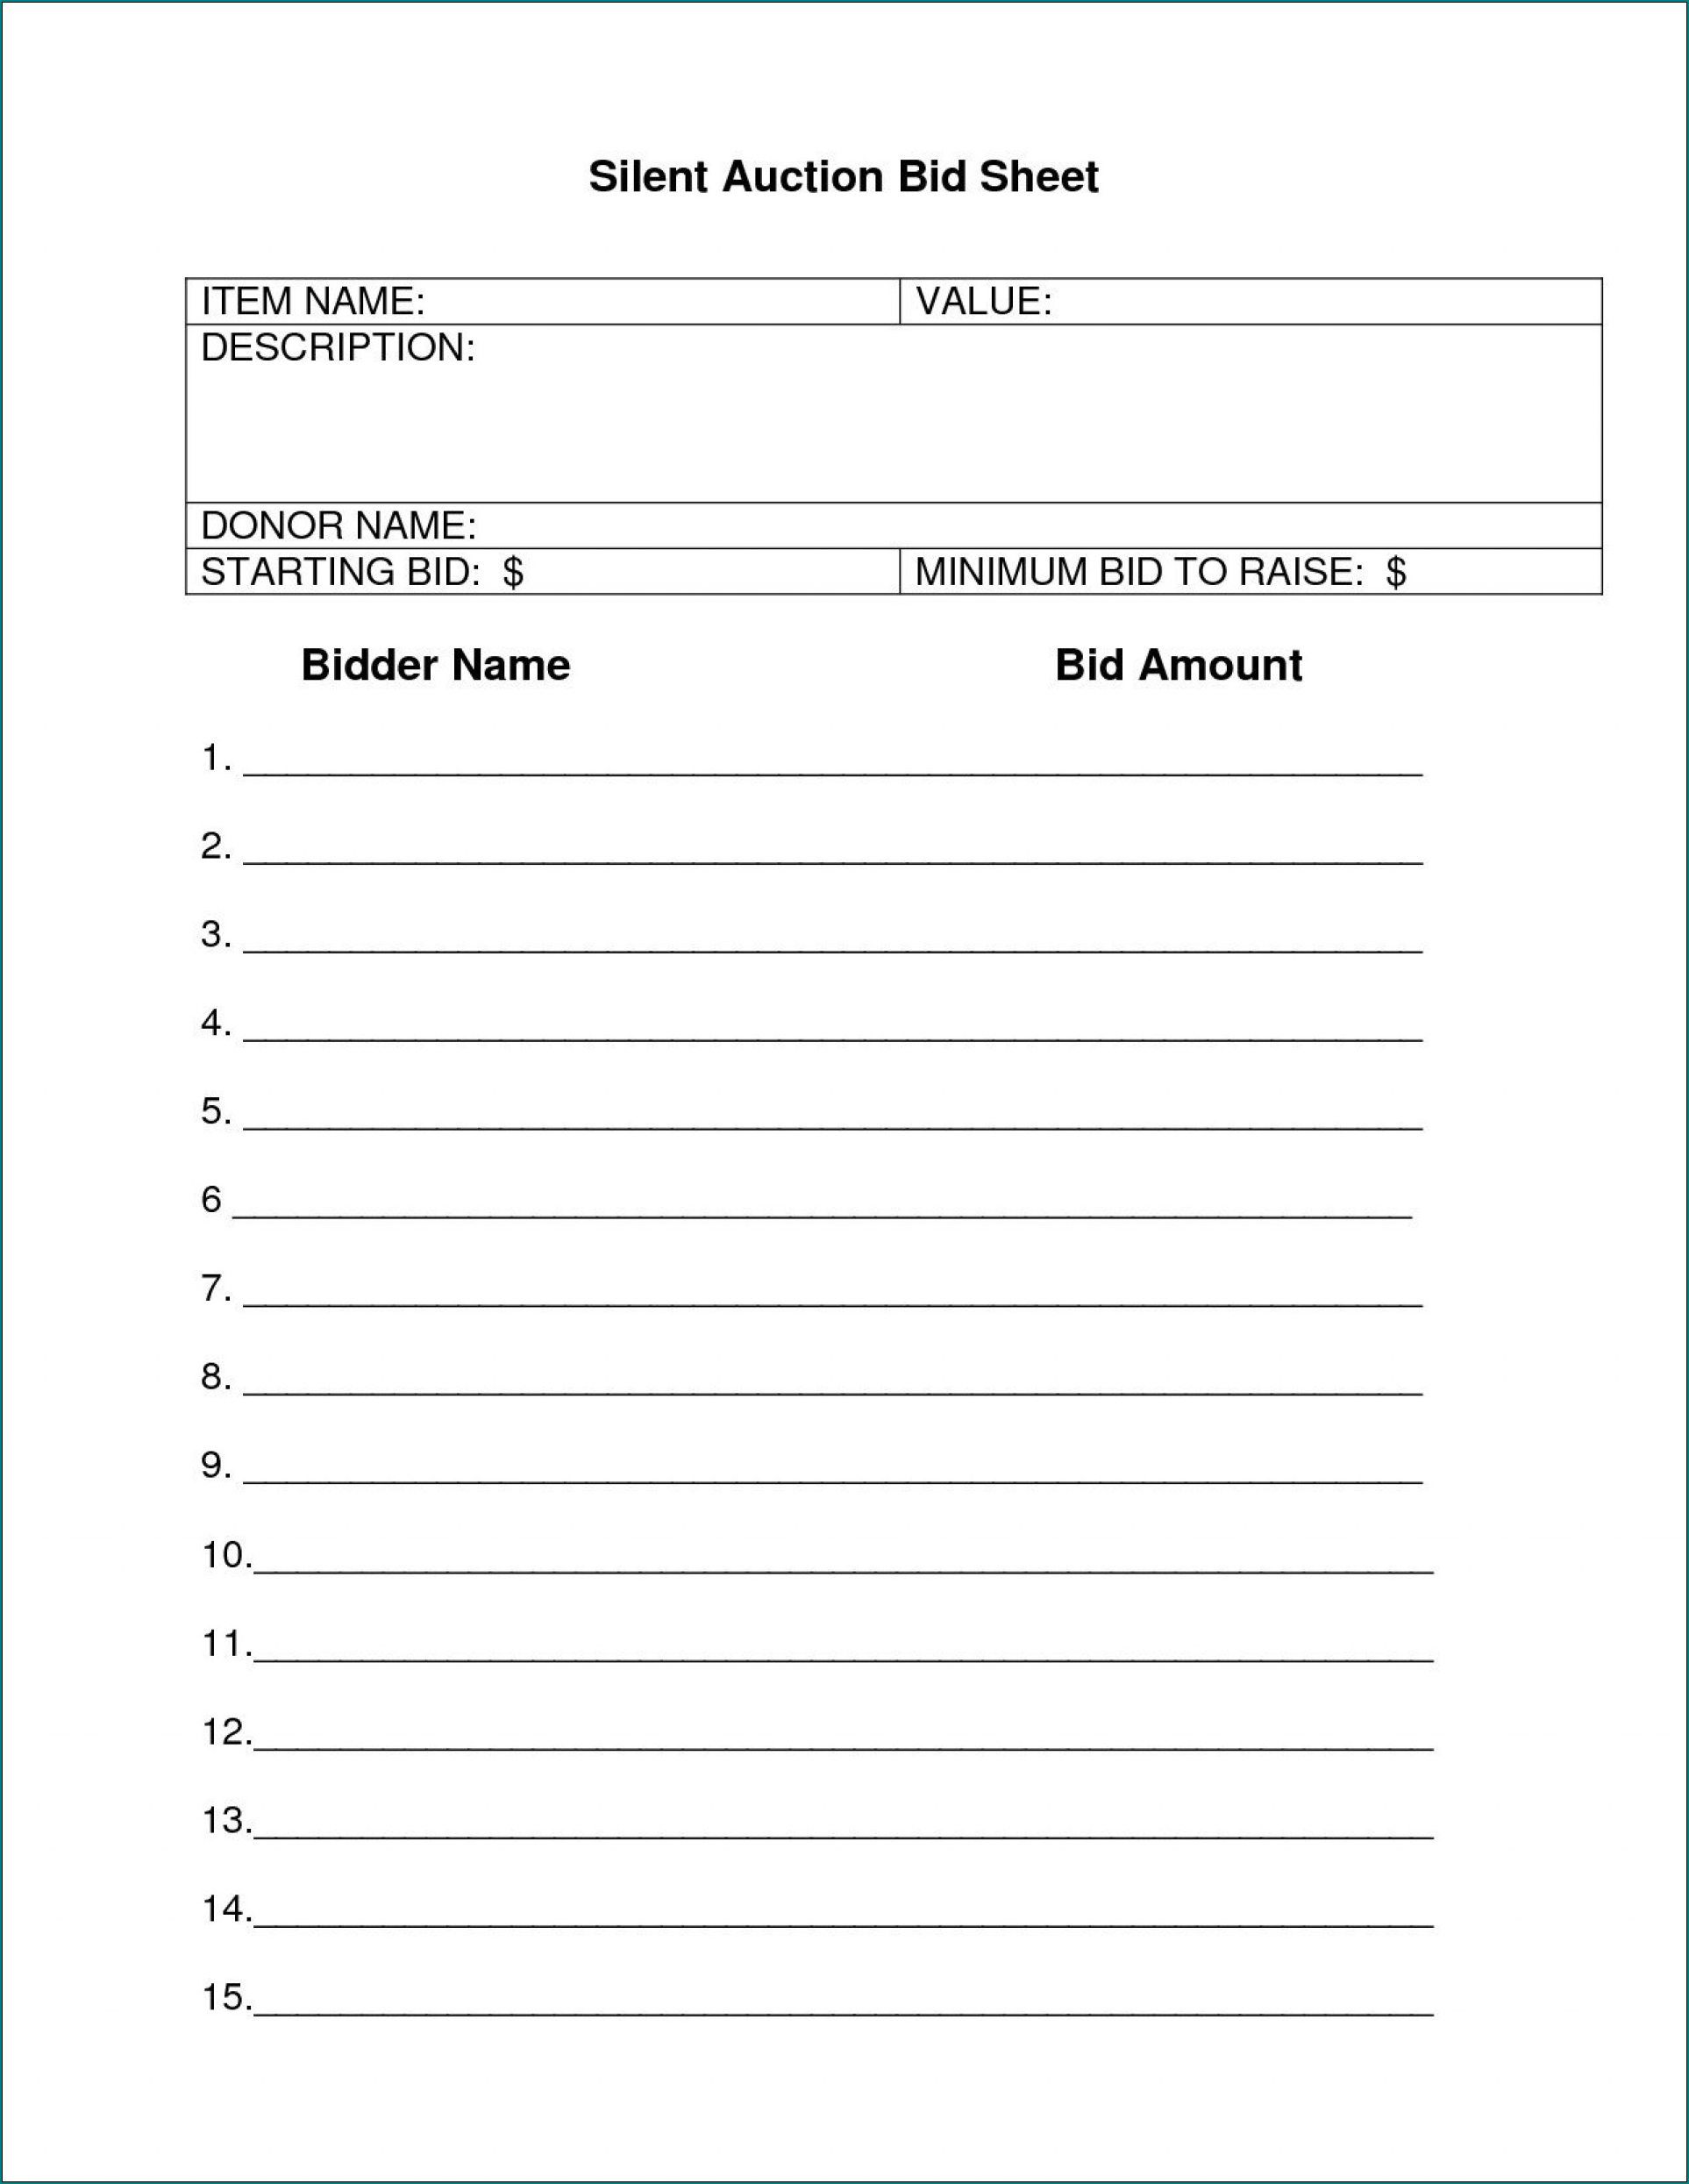 Example of Silent Auction Template